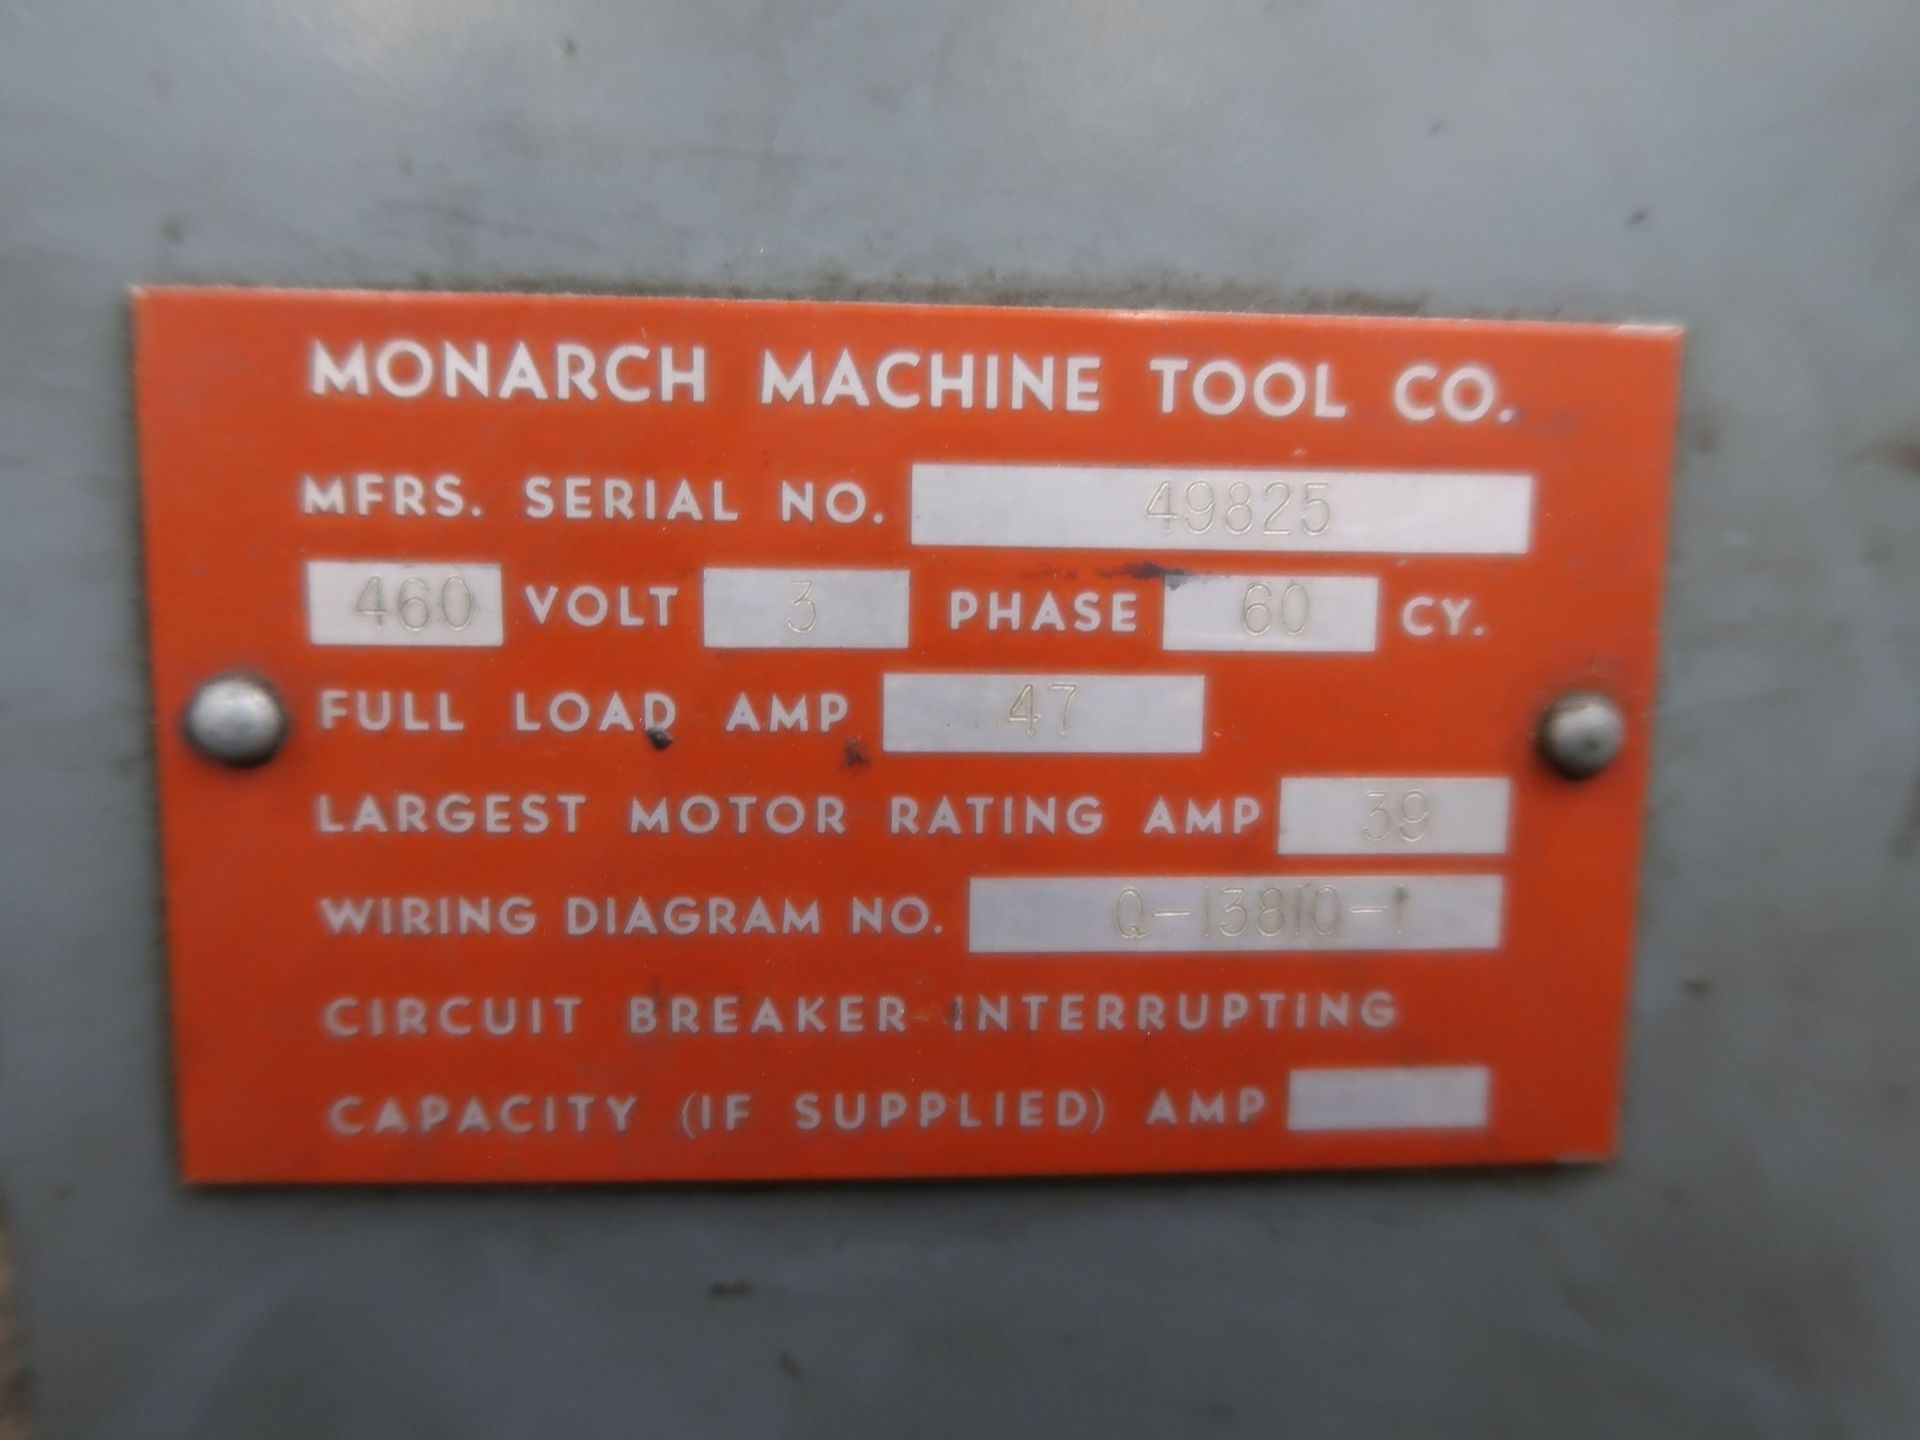 28" X 192" MONARCH MODEL 3220-28X192 GEARD HEAD ENGINE LATHE; S/N 49825, SPINDLE SPEED 31 - 1,140 - Image 17 of 17